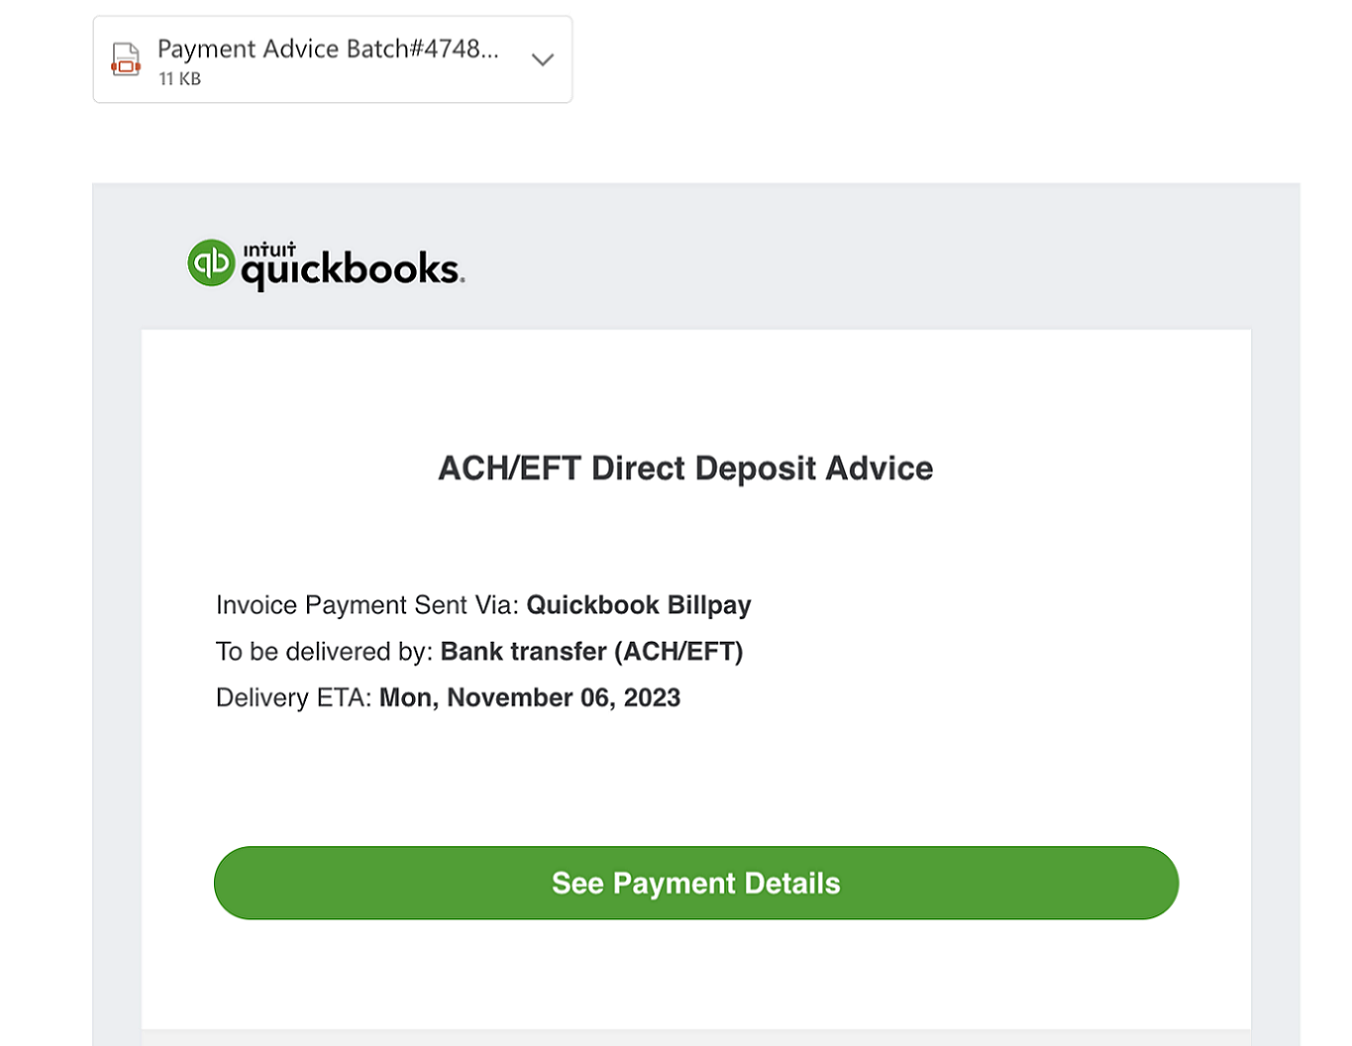 A fake QuickBooks notification for "ACH/EFT Direct Deposit Advice".